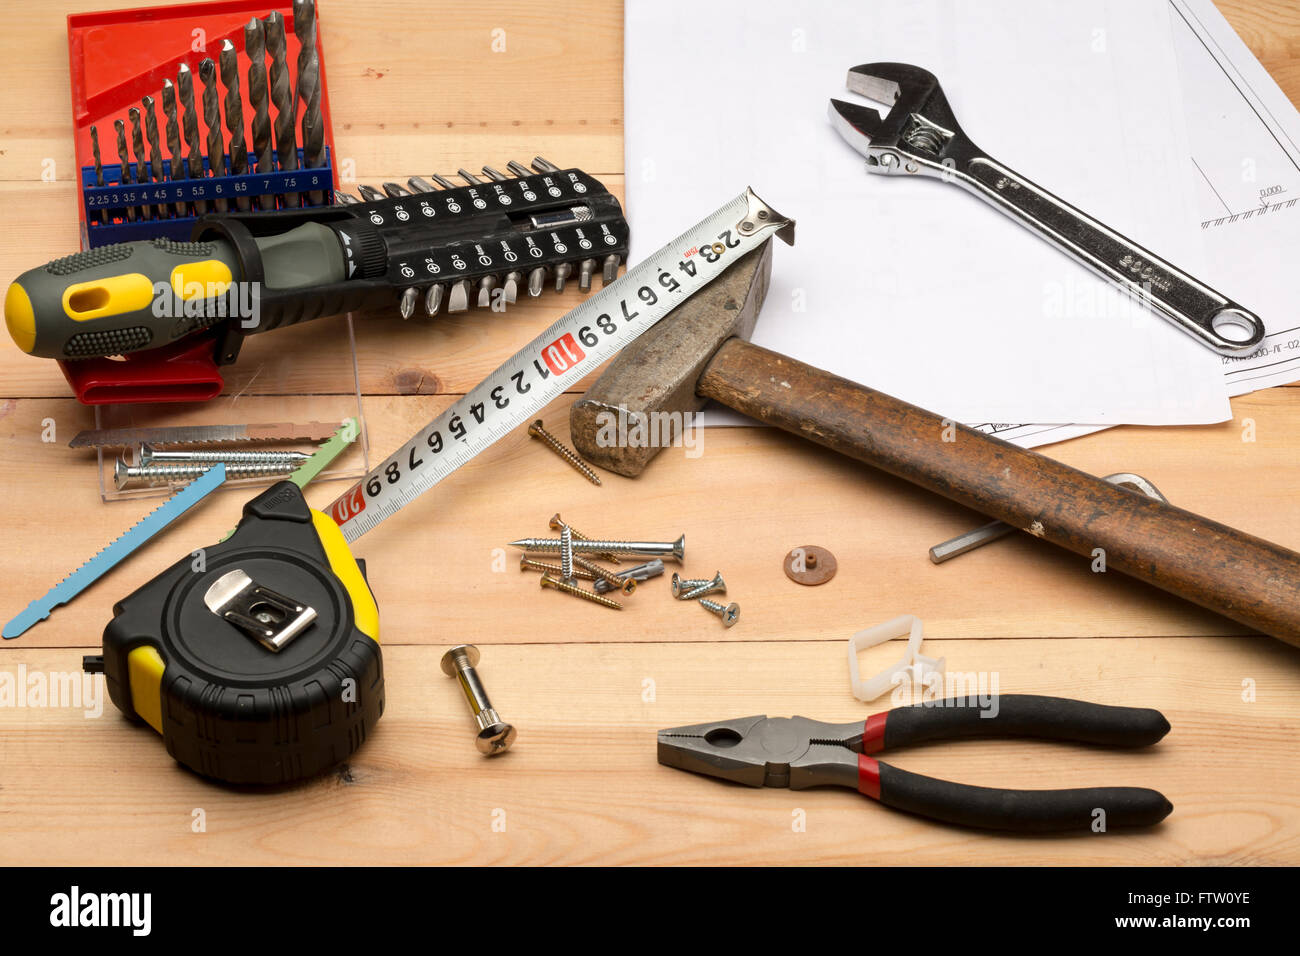 Set of different tools for repair and construction: hammer,pliers,screwdriver,screws,drill set,tape measure,wrench,hand tool Stock Photo